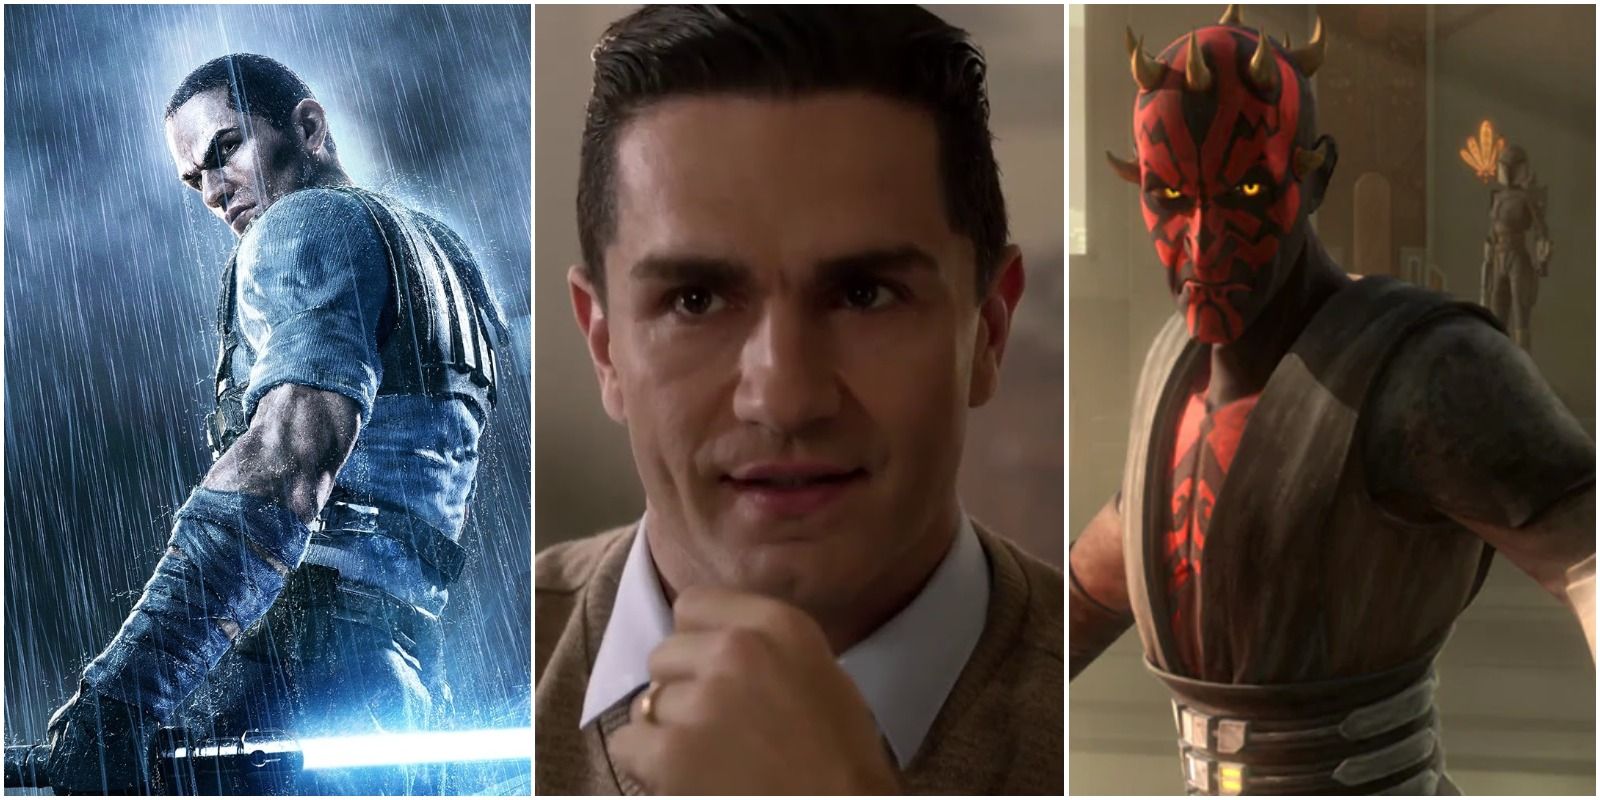 Star Wars: Every Role Of Sam Witwer's, Ranked